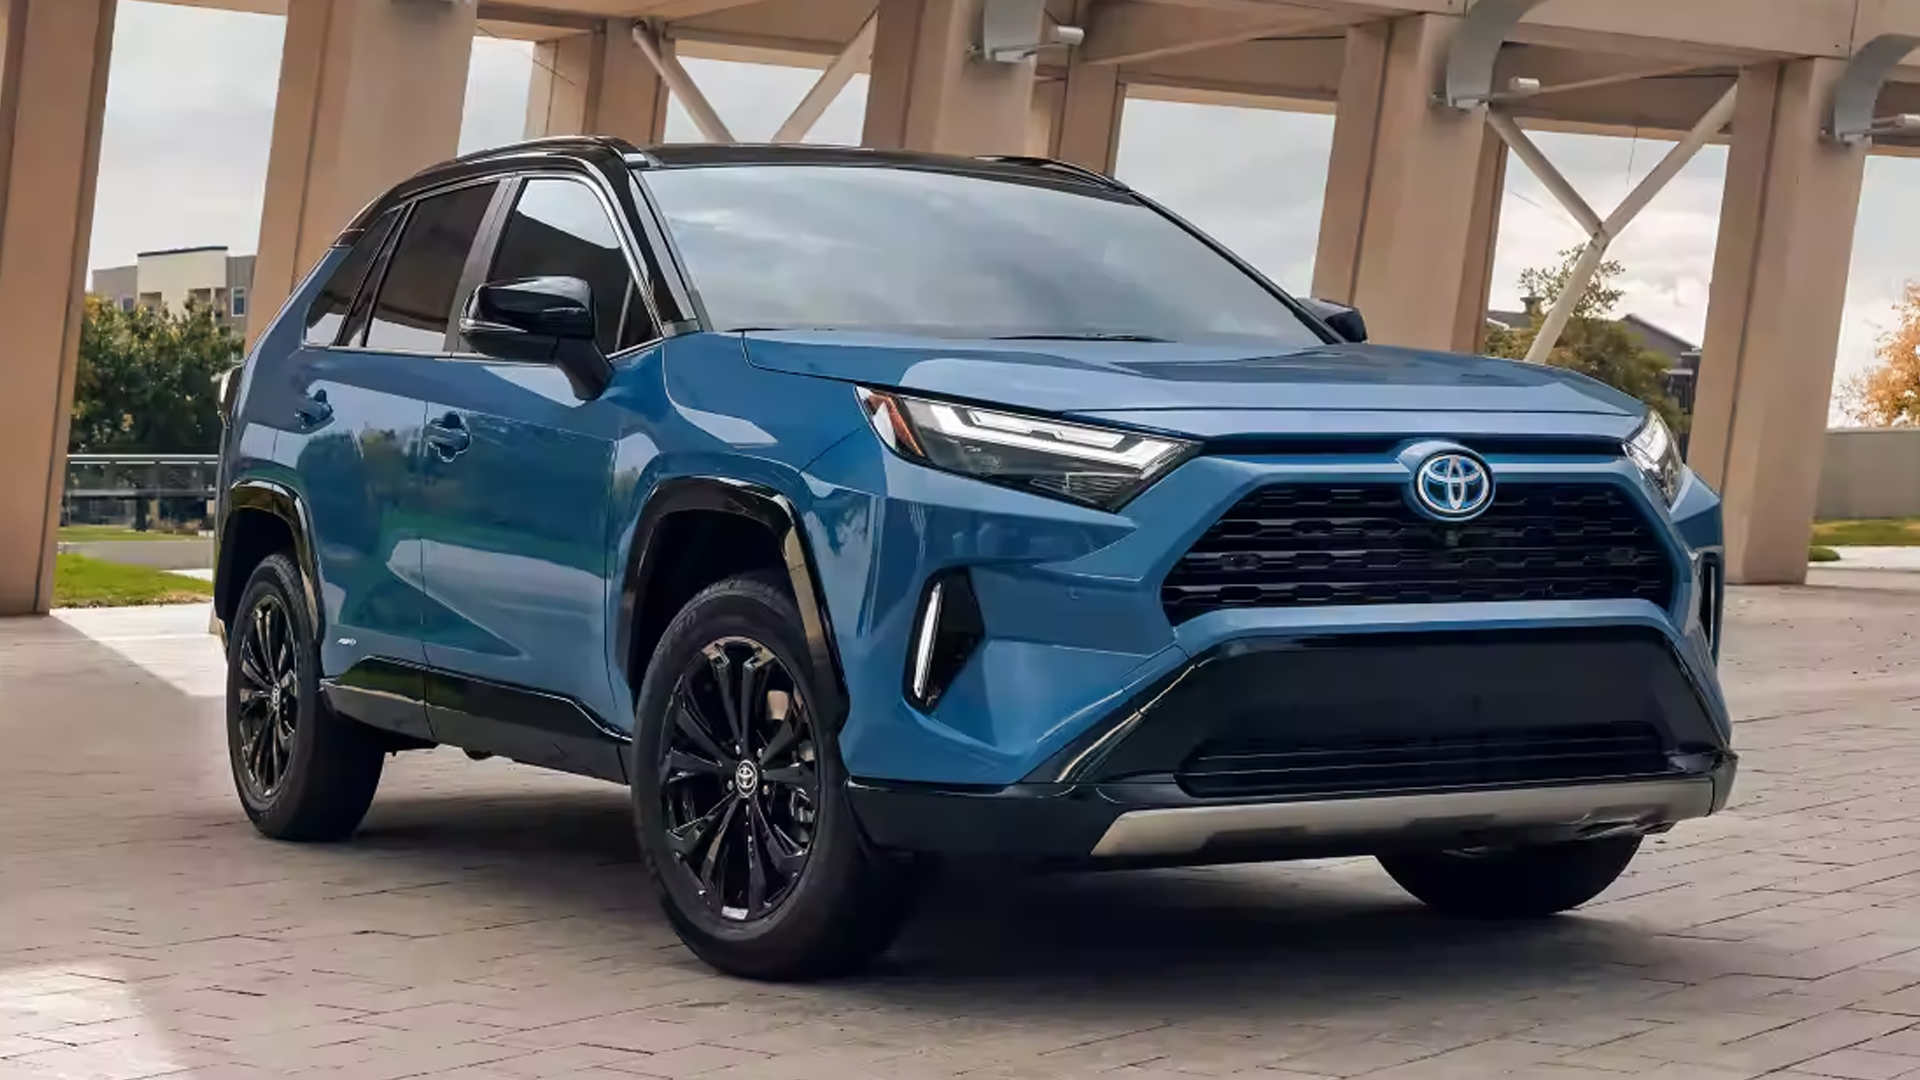 What are the Model Features of the All-New 2022 Toyota RAV4